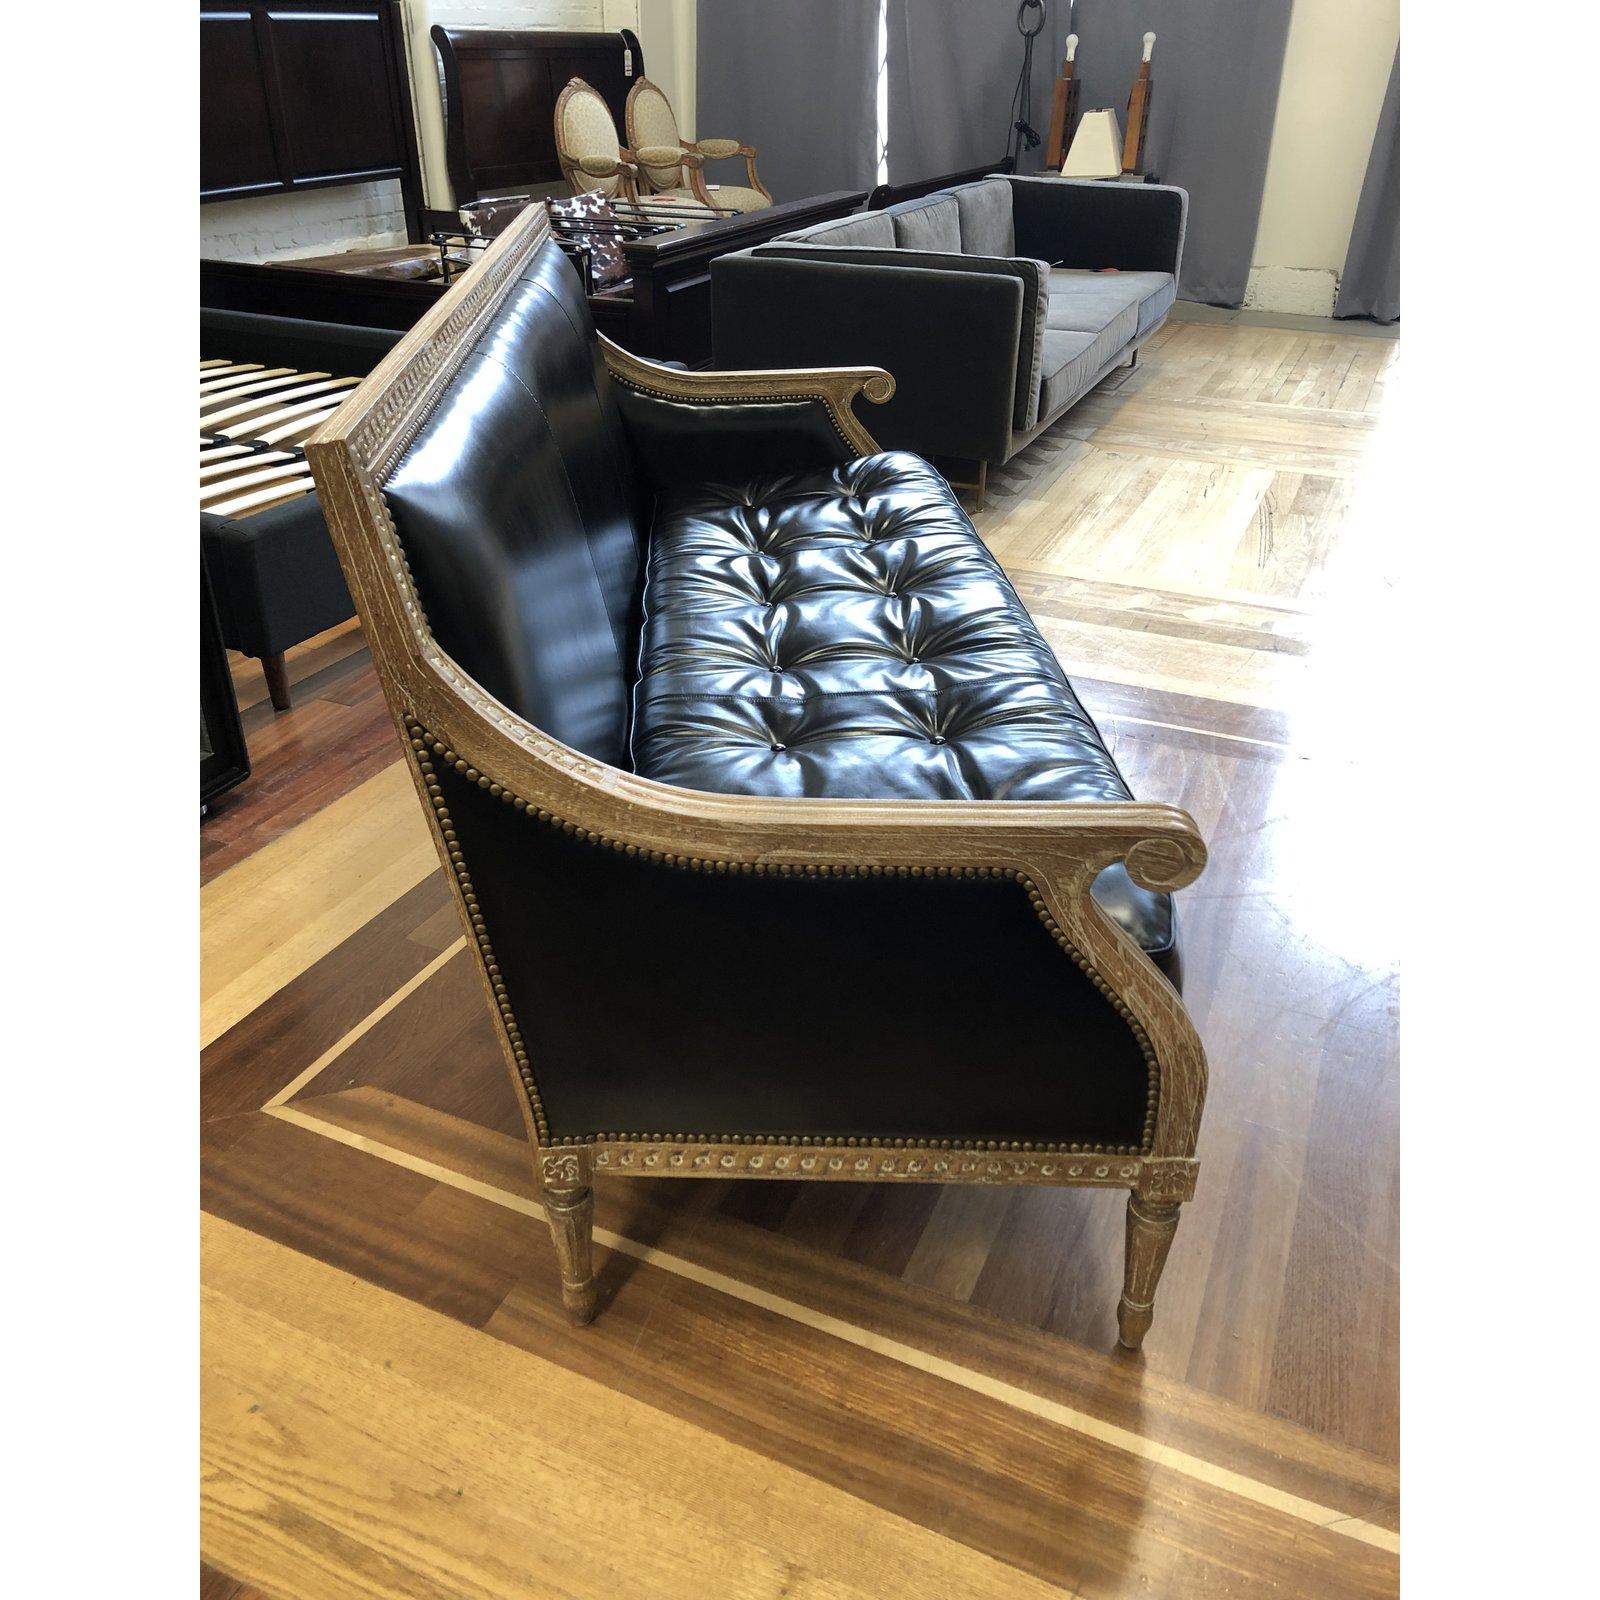 It presents a Hanna sofa by Oly Studio. Introducing a graceful French elegance to any room. It's square back and fluted legs are complemented by sophisticated carved details, plush upholstery and antique gold finish nailhead trim. The seat cushion